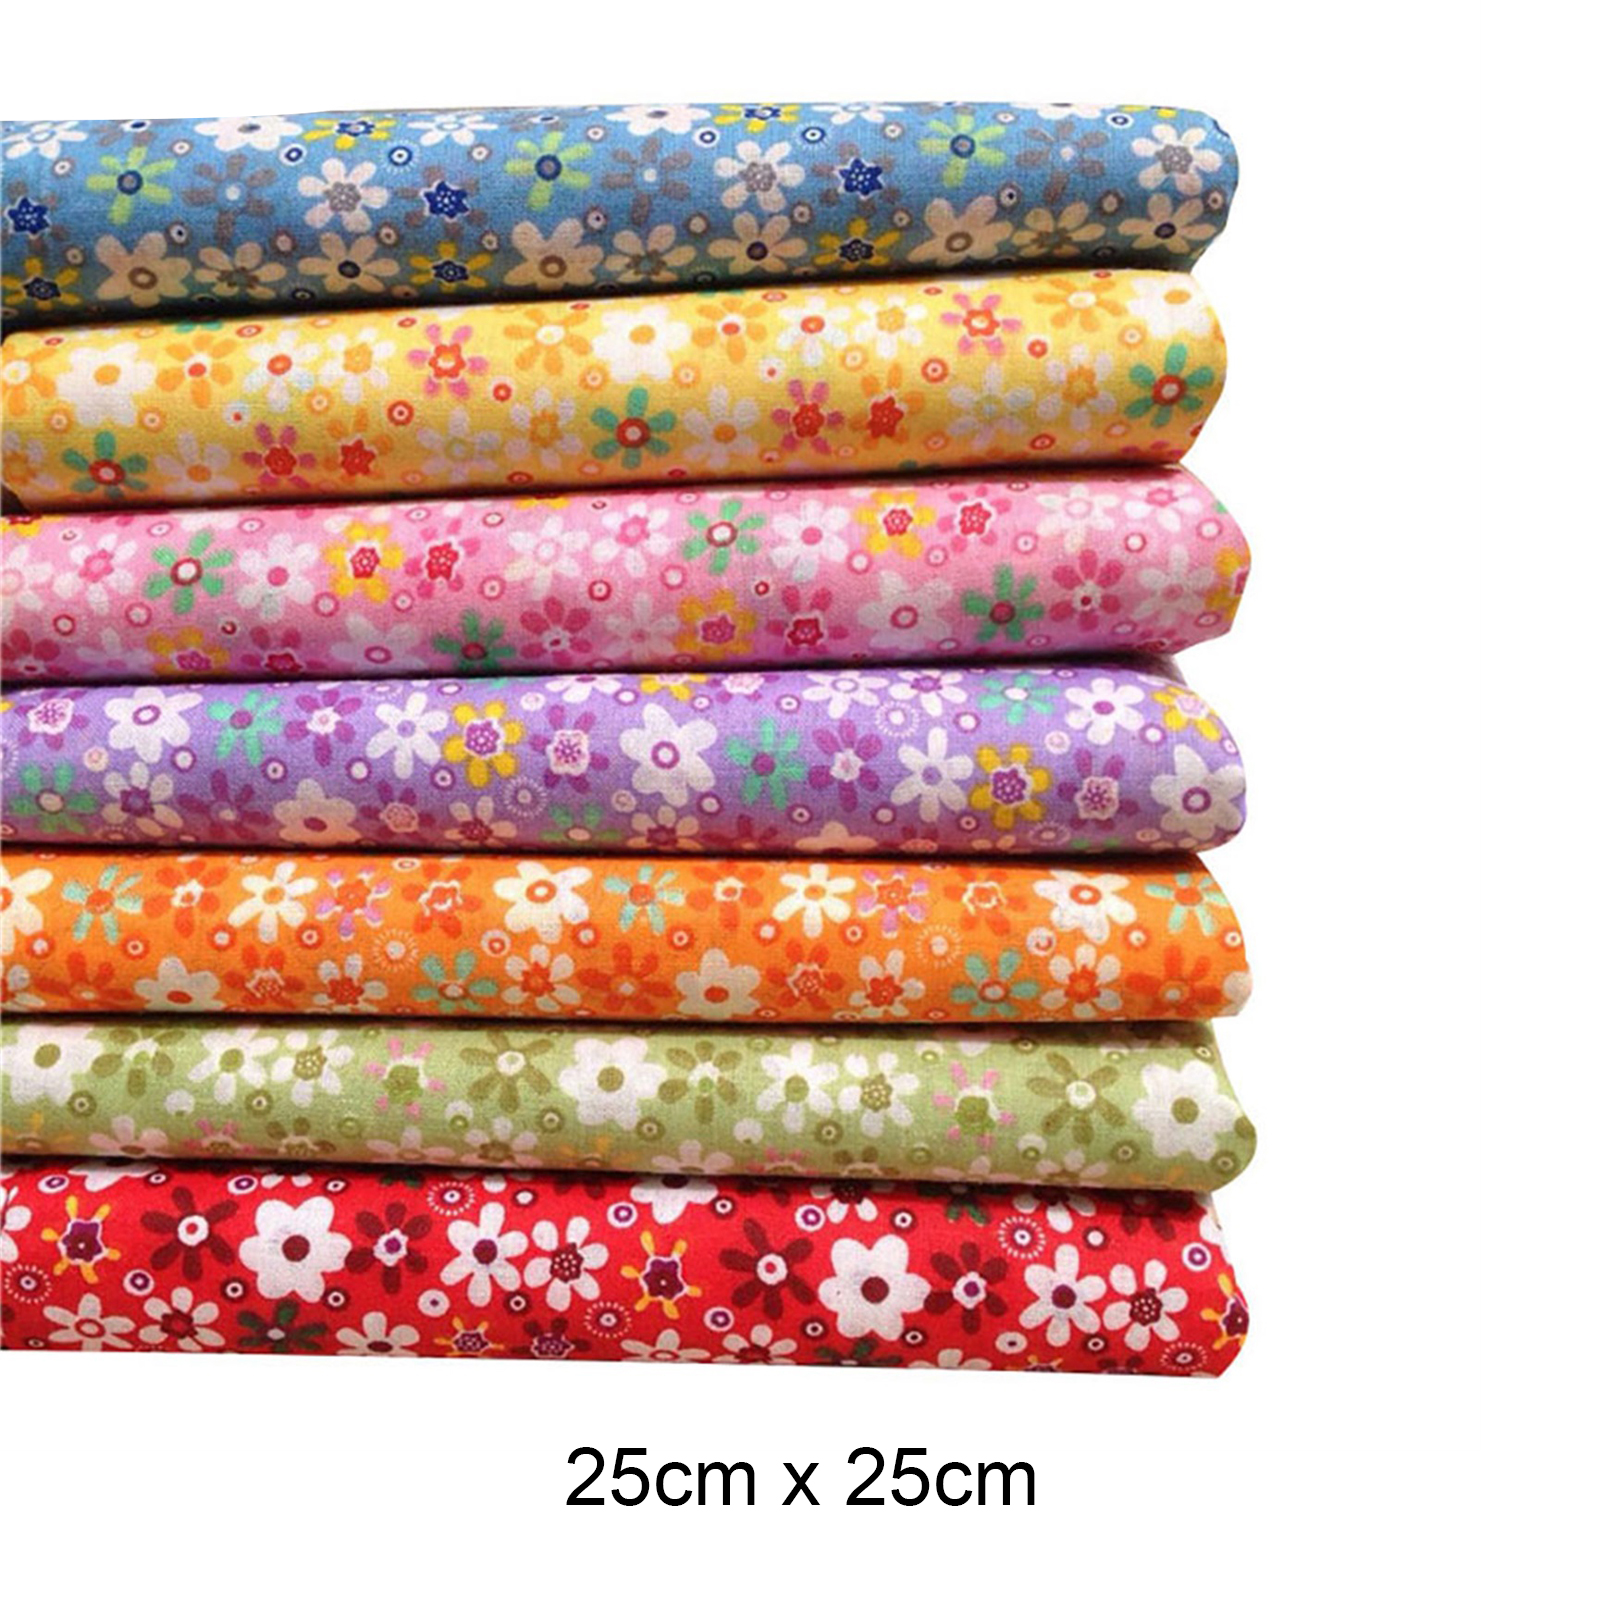 SPRING PARK 7Pcs/Set Soft Floral Print Cotton Cloth Fabric Hand Craft Sewing Material for DIY Handmade - image 5 of 7